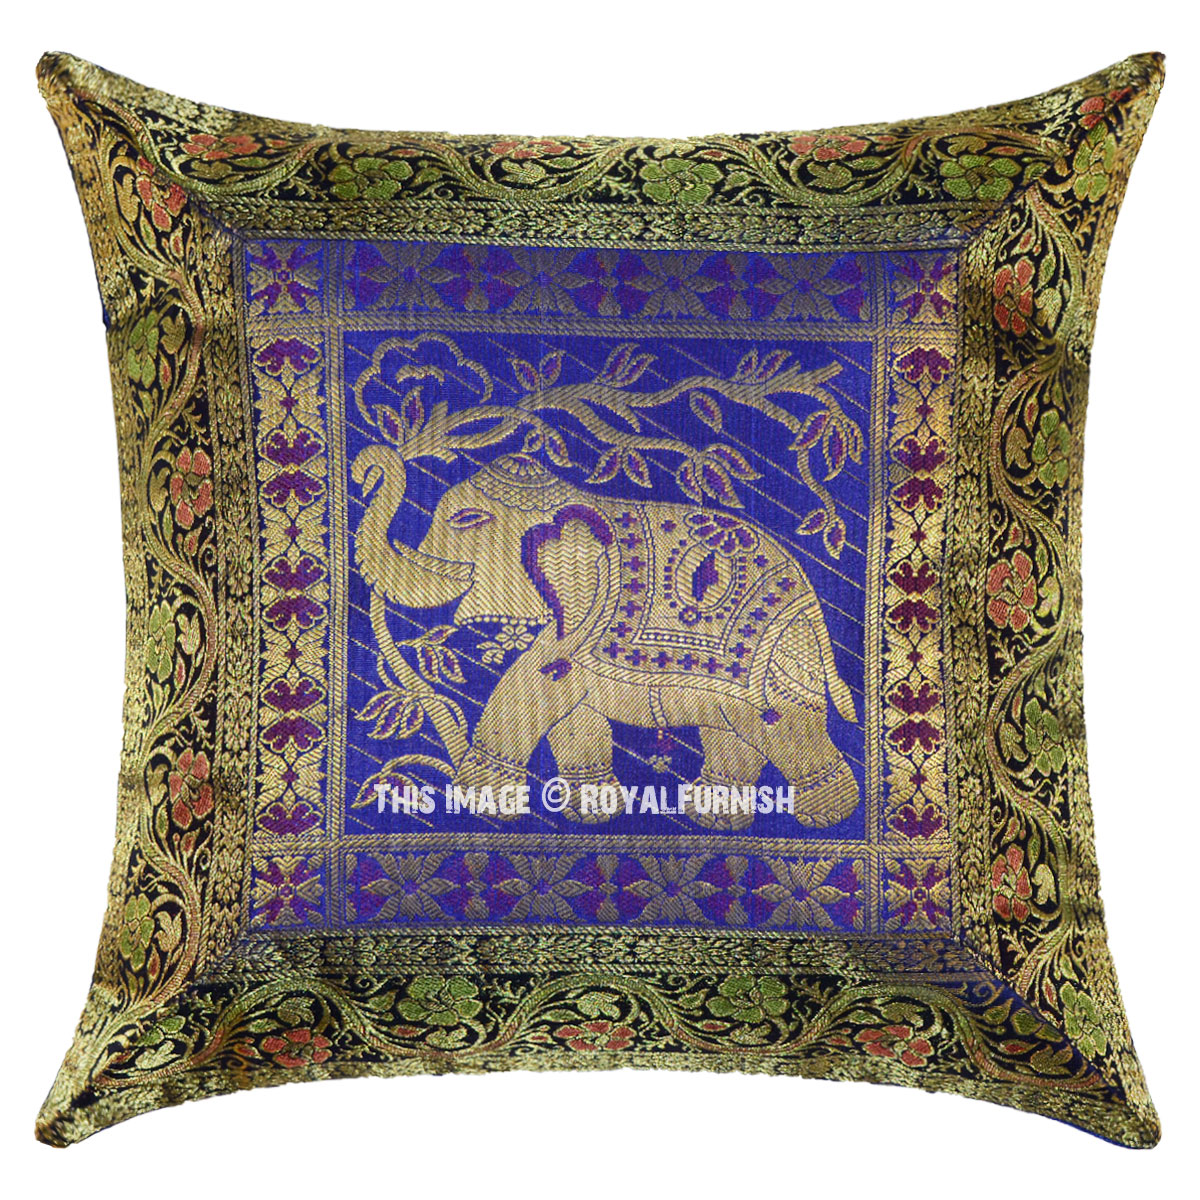 Details about   16" Brocade Silk Pillow Cover With Traditional Elephant Design Turquoise Blue 